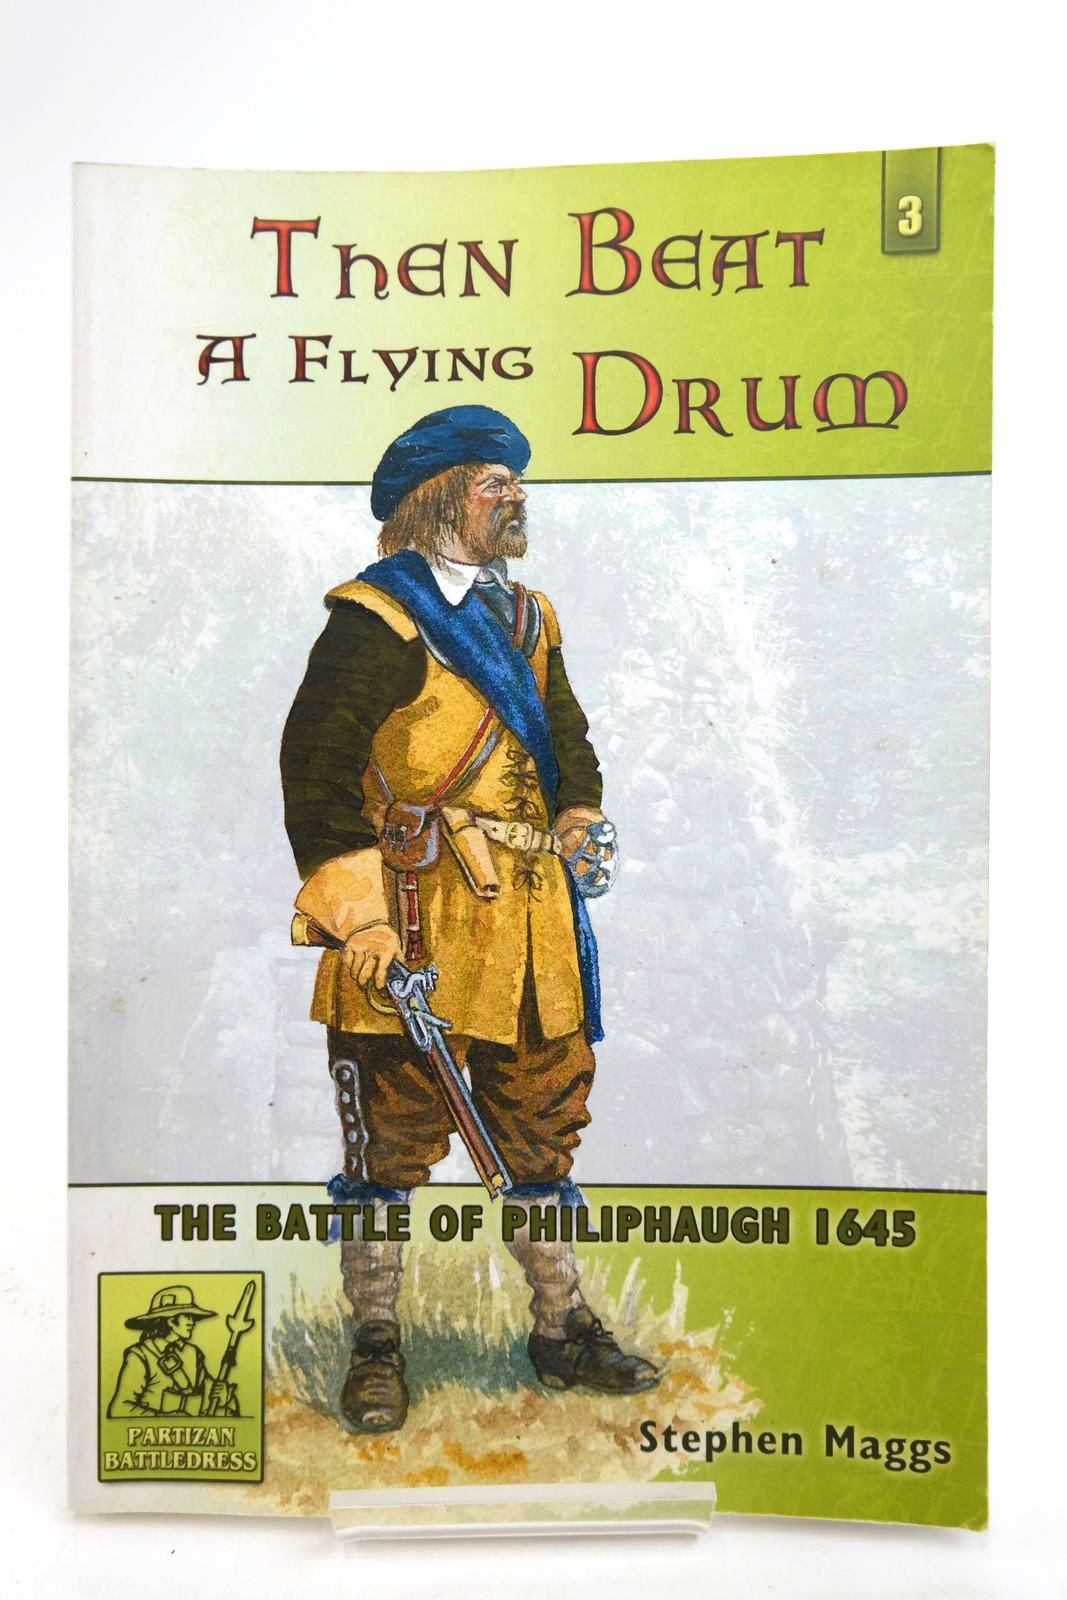 Photo of THEN BEAT A FLYING DRUM: THE BATTLE OF PHILIPHAUGH 1645 written by Maggs, Stephen
Reid, Stuart published by Partizan Press (STOCK CODE: 2139025)  for sale by Stella & Rose's Books